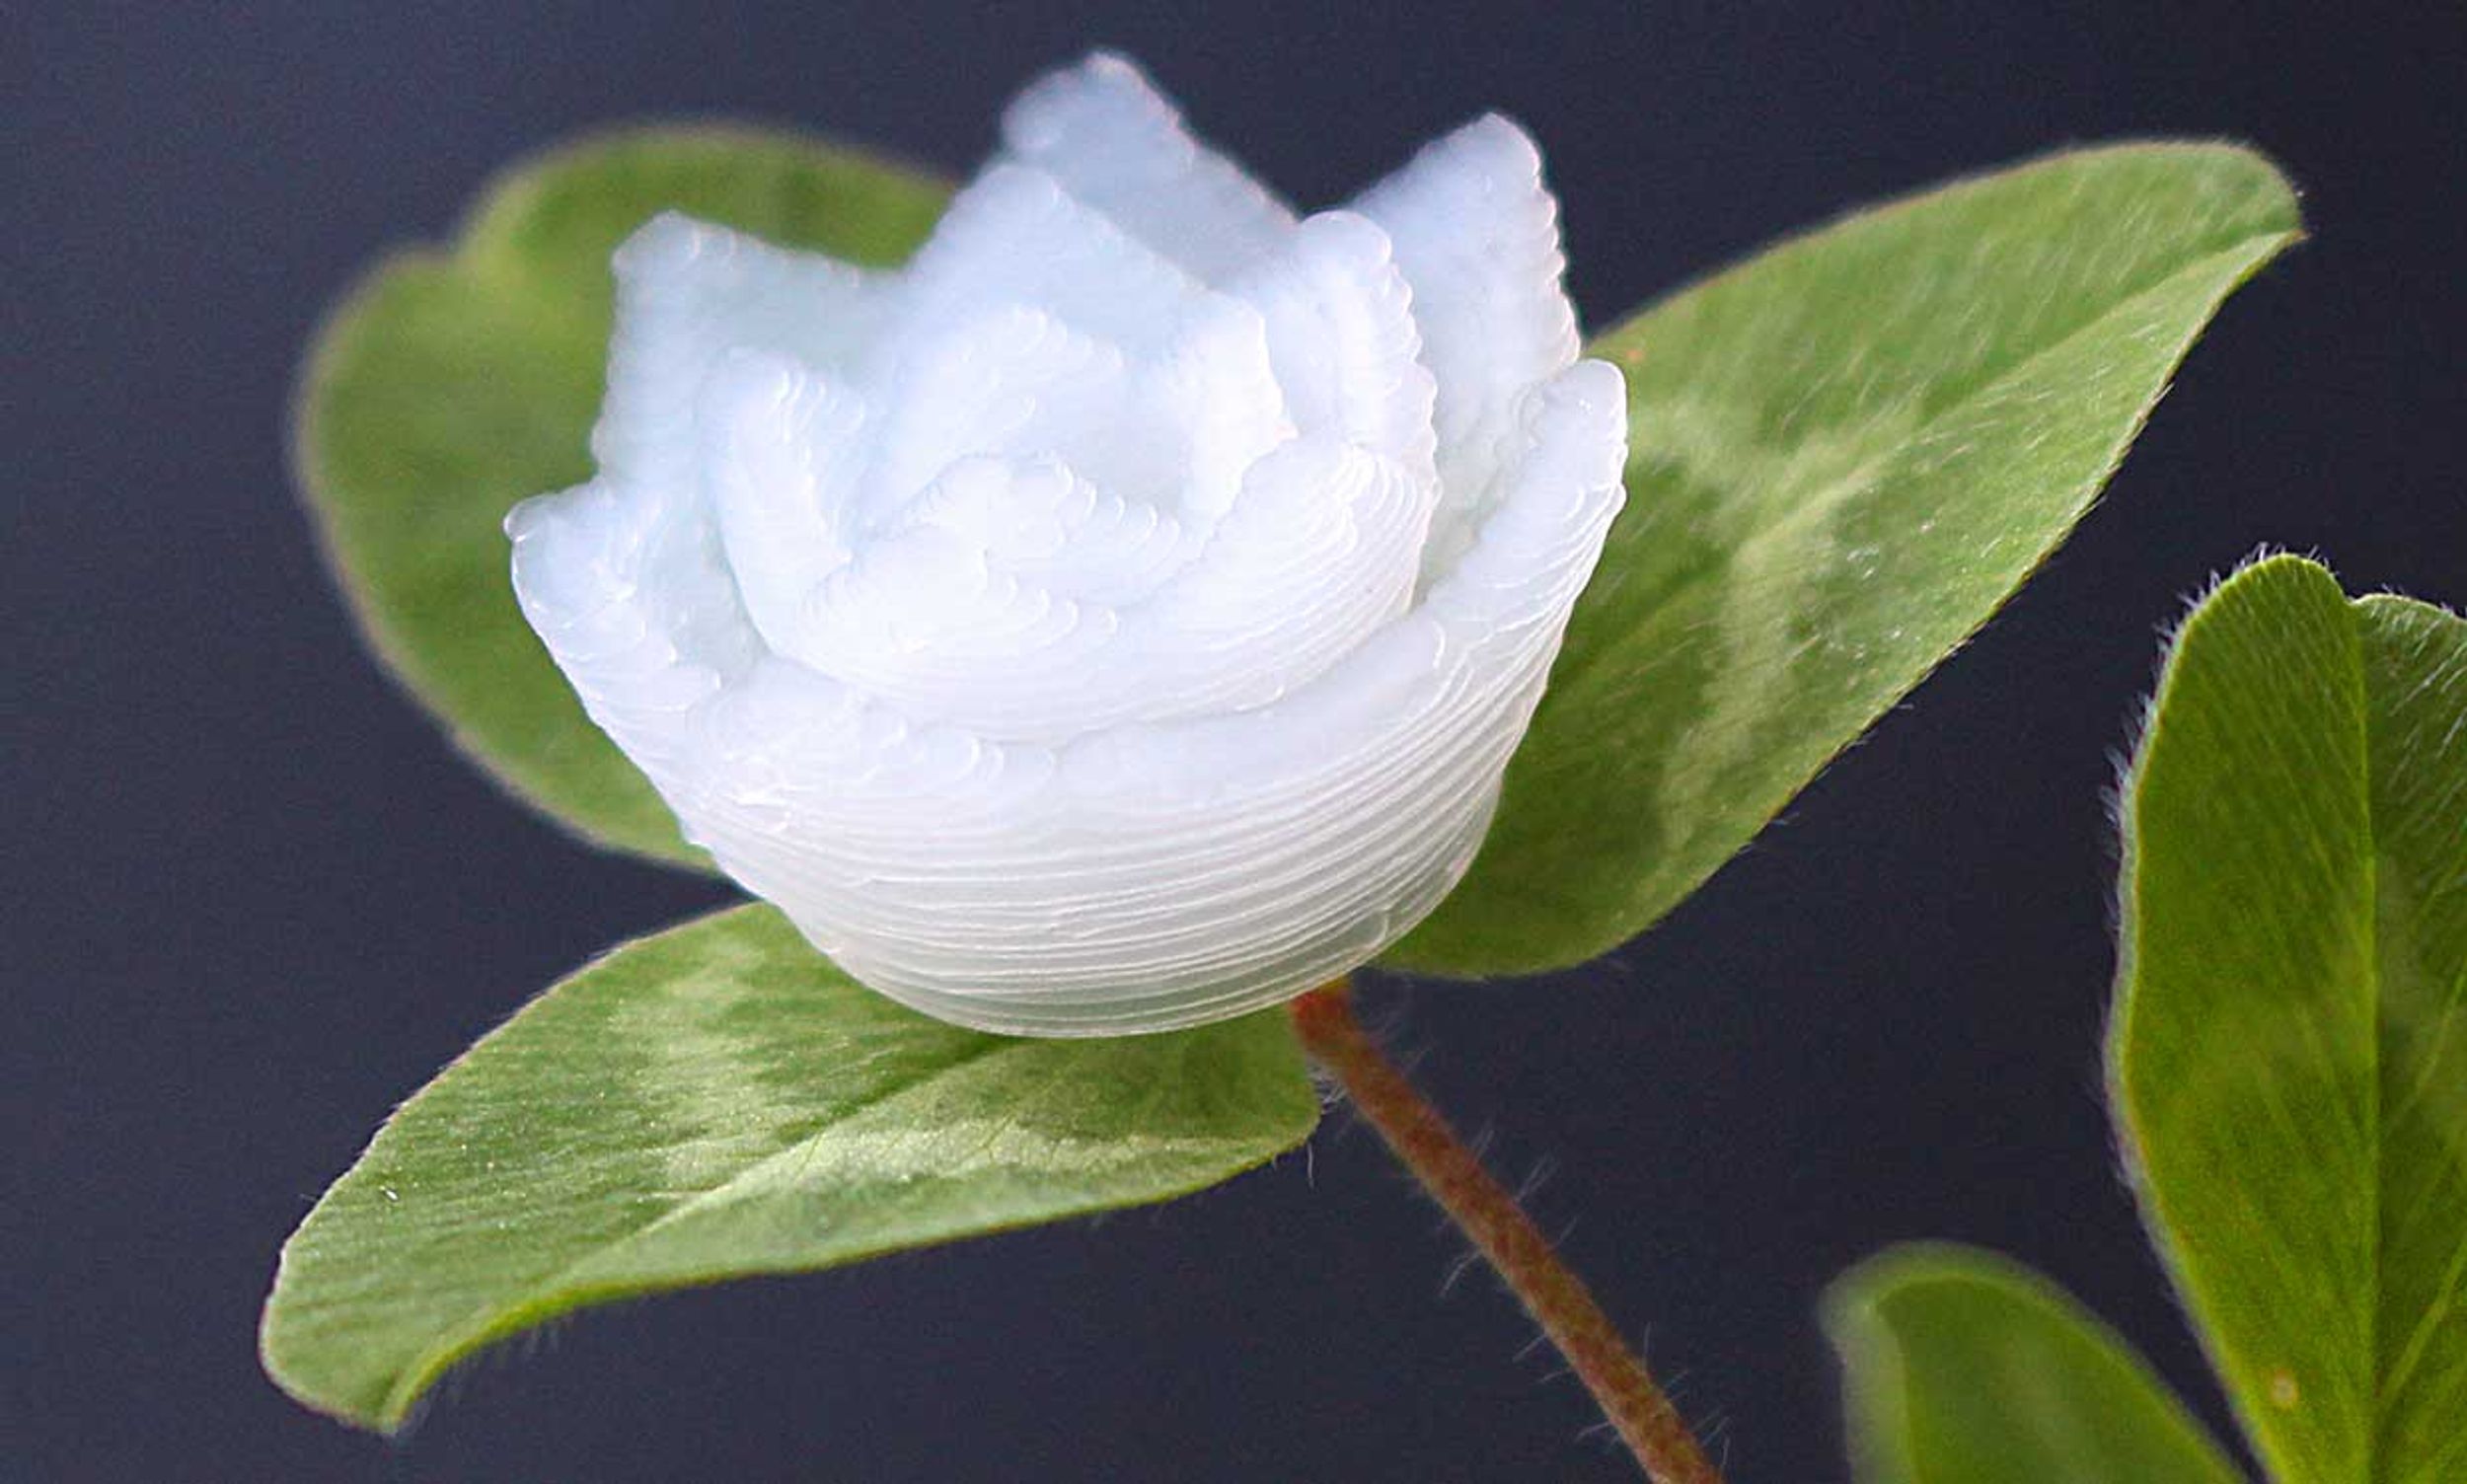 The researchers demoed a tiny lotus flower printed in aerosol gel, measuring about four mm across with the petals about a millimeter thick.